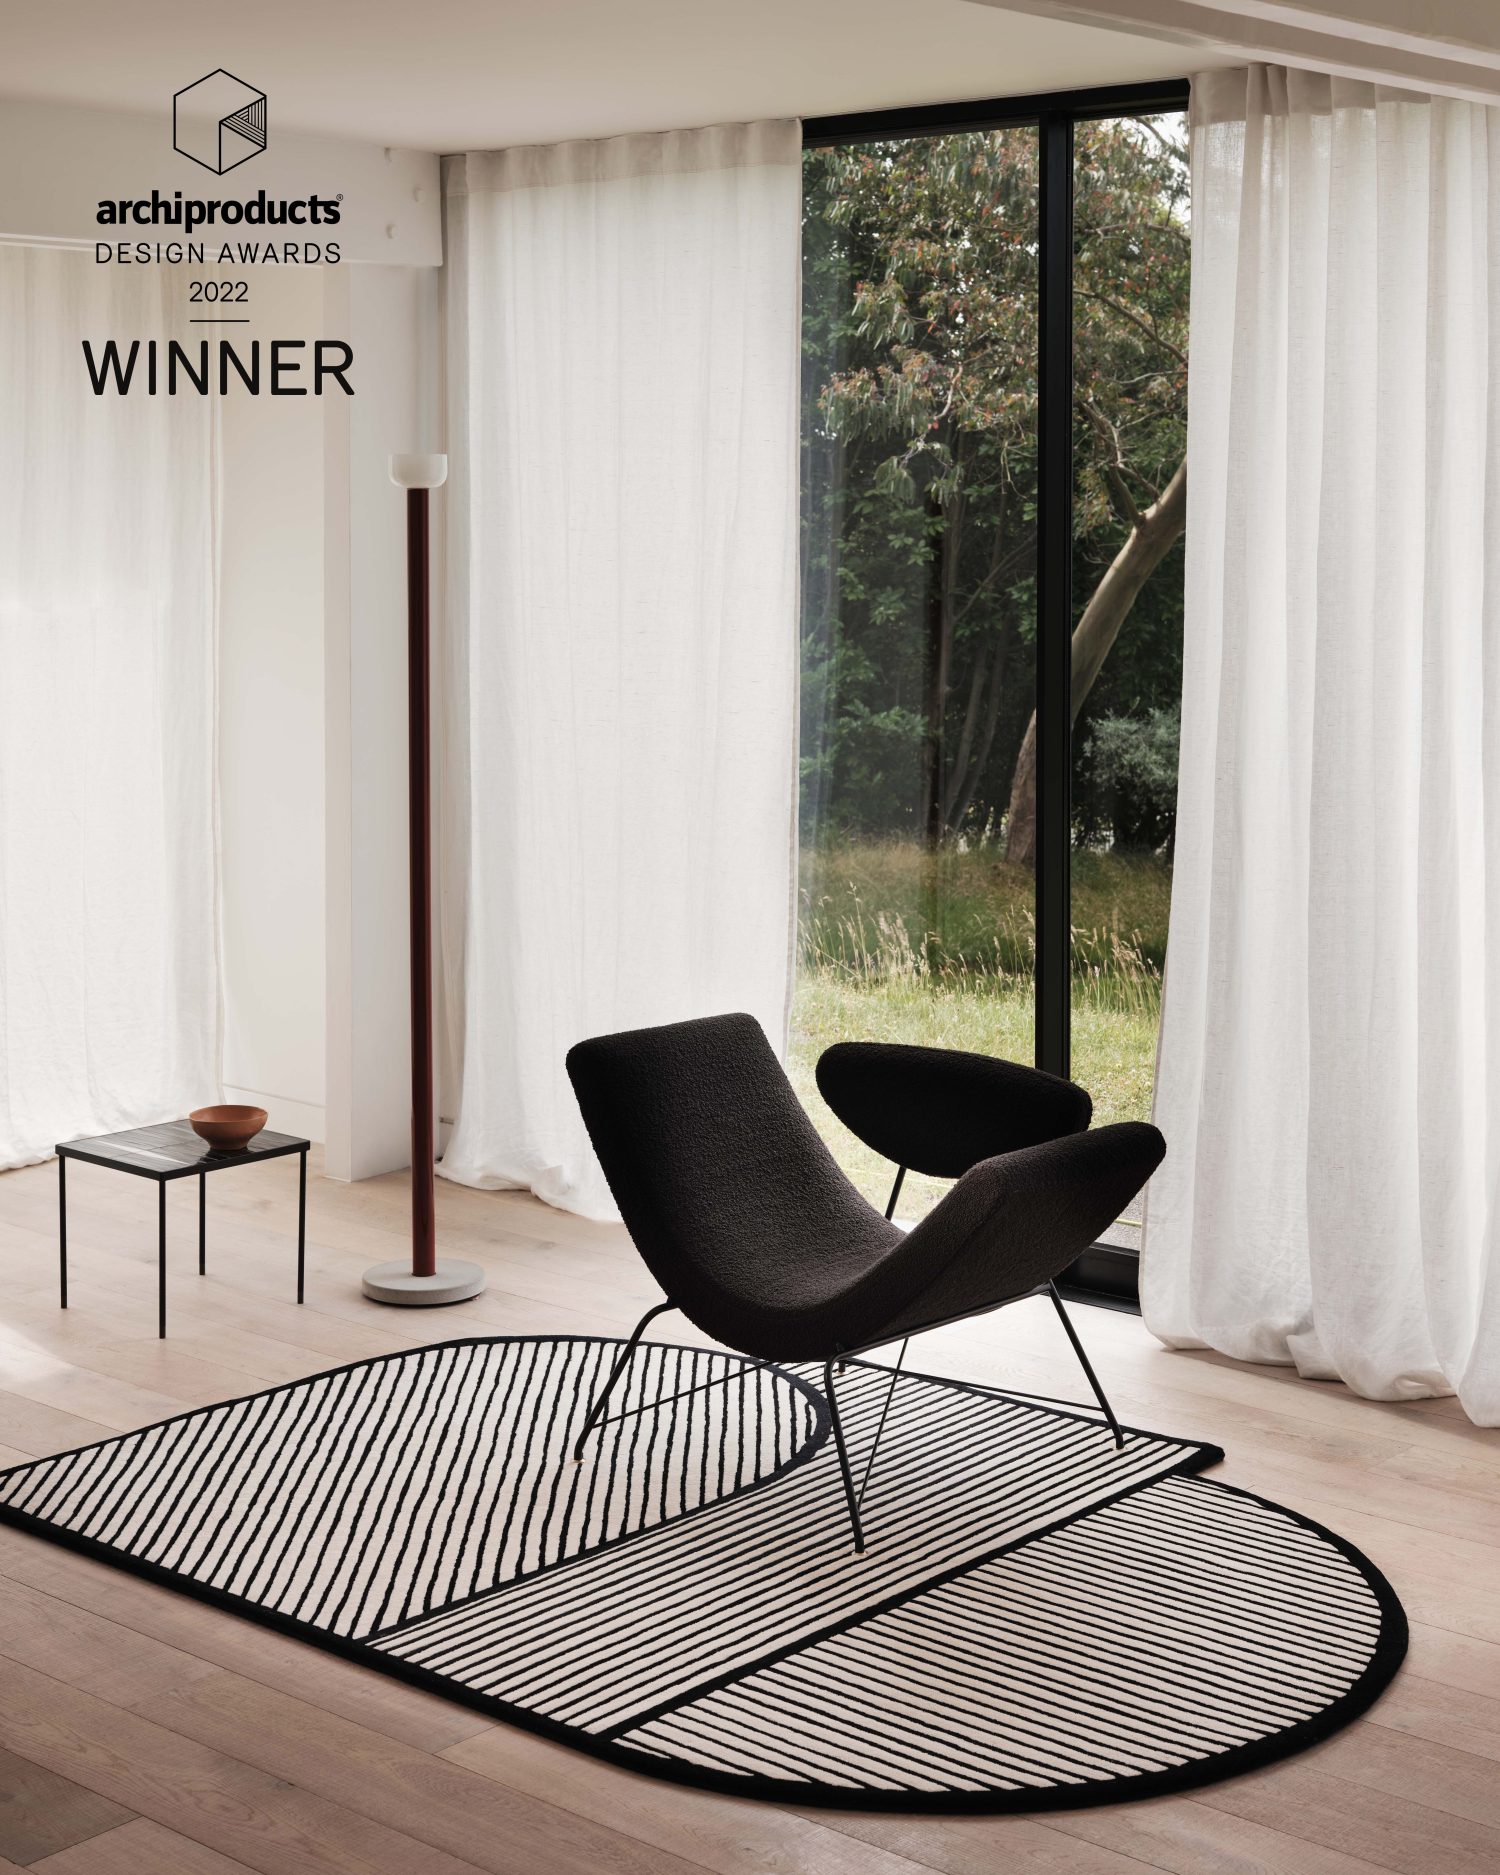 Casa as Archiproducts Winner 2022